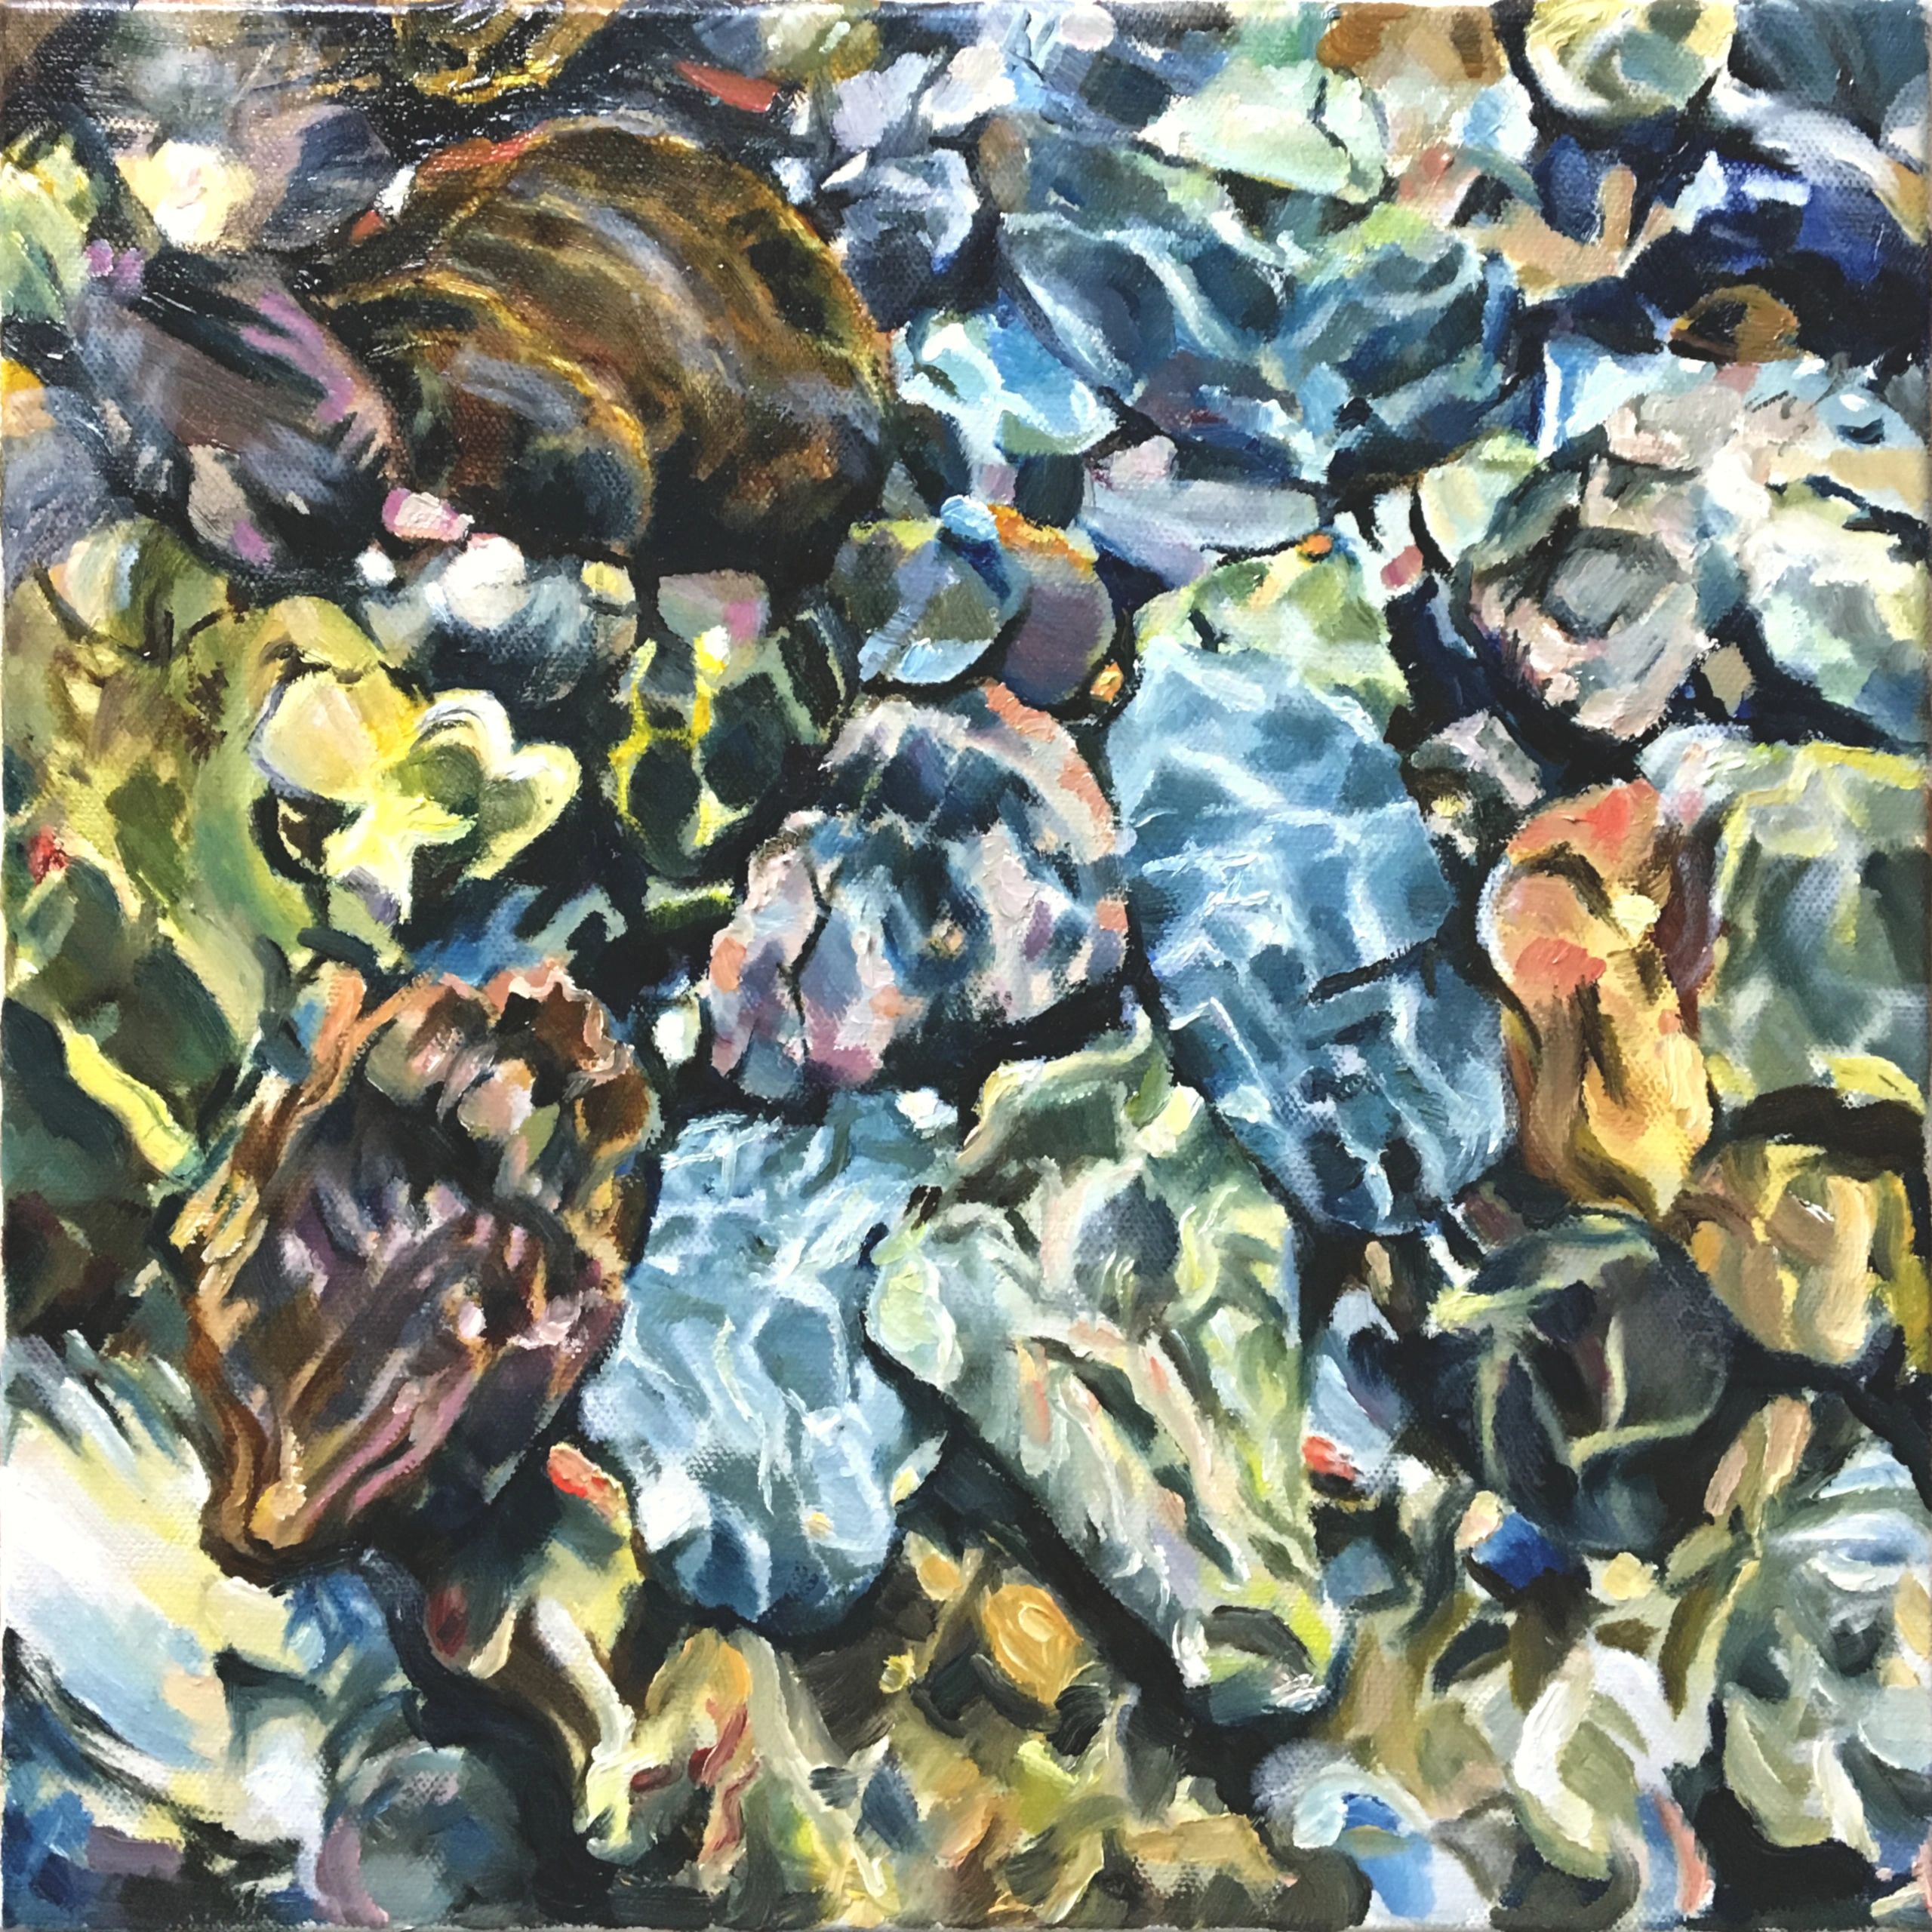 Oil painting on canvas, stones in river, semi abstract. Light reflections on water.